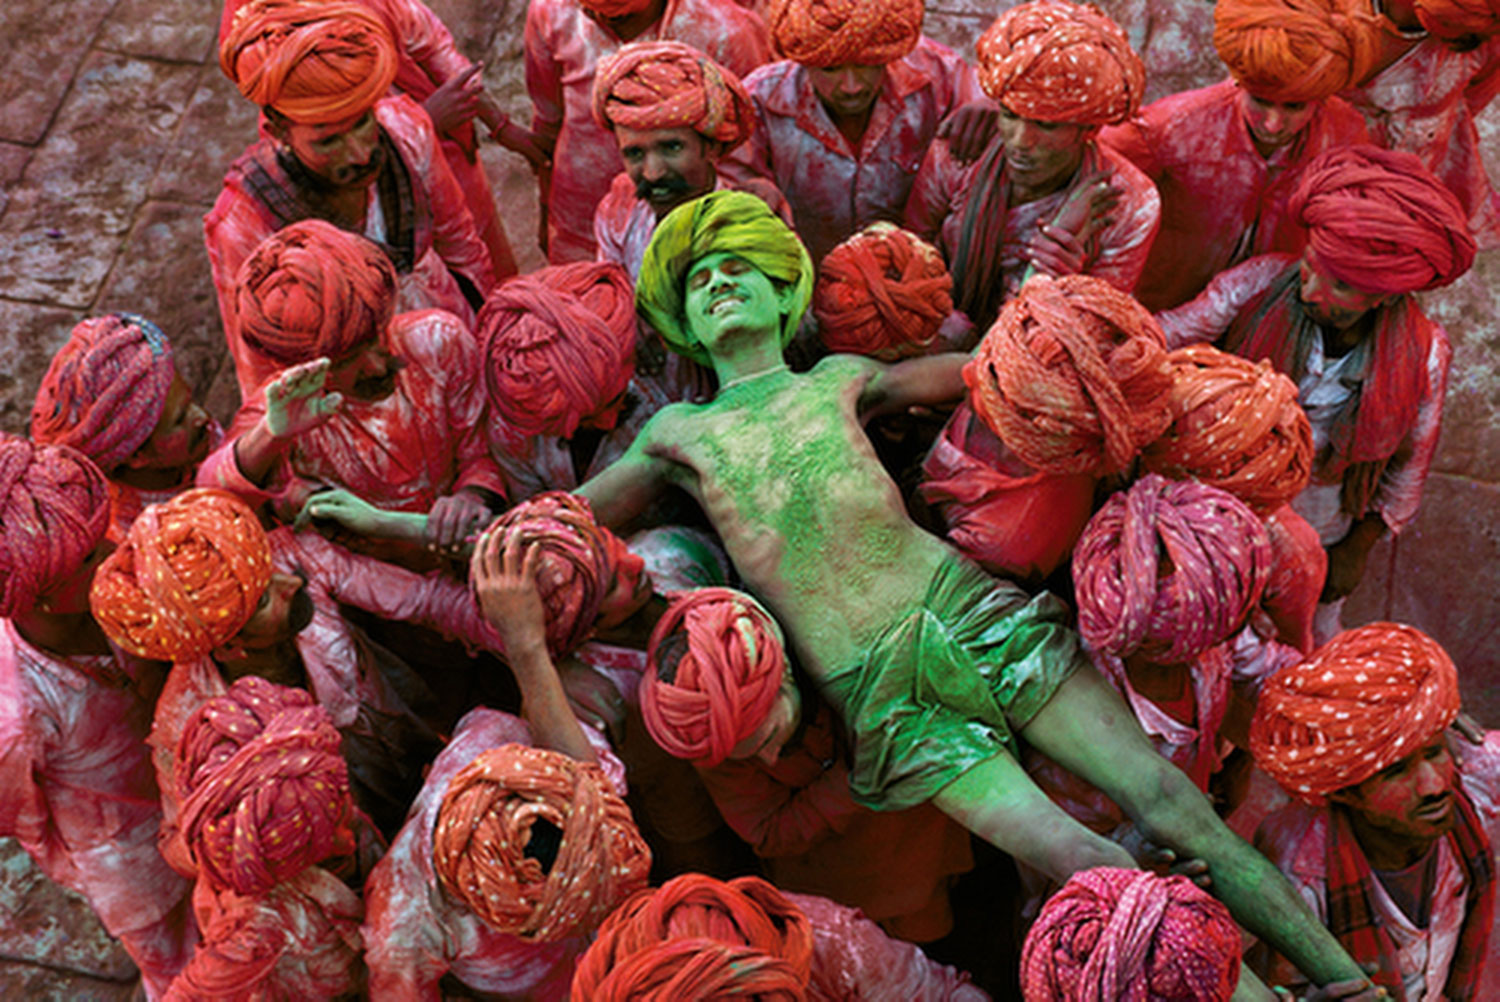 Rajasthan, 1996. A crowd carries a man during the Holi festival. Photograph by Steve McCurry